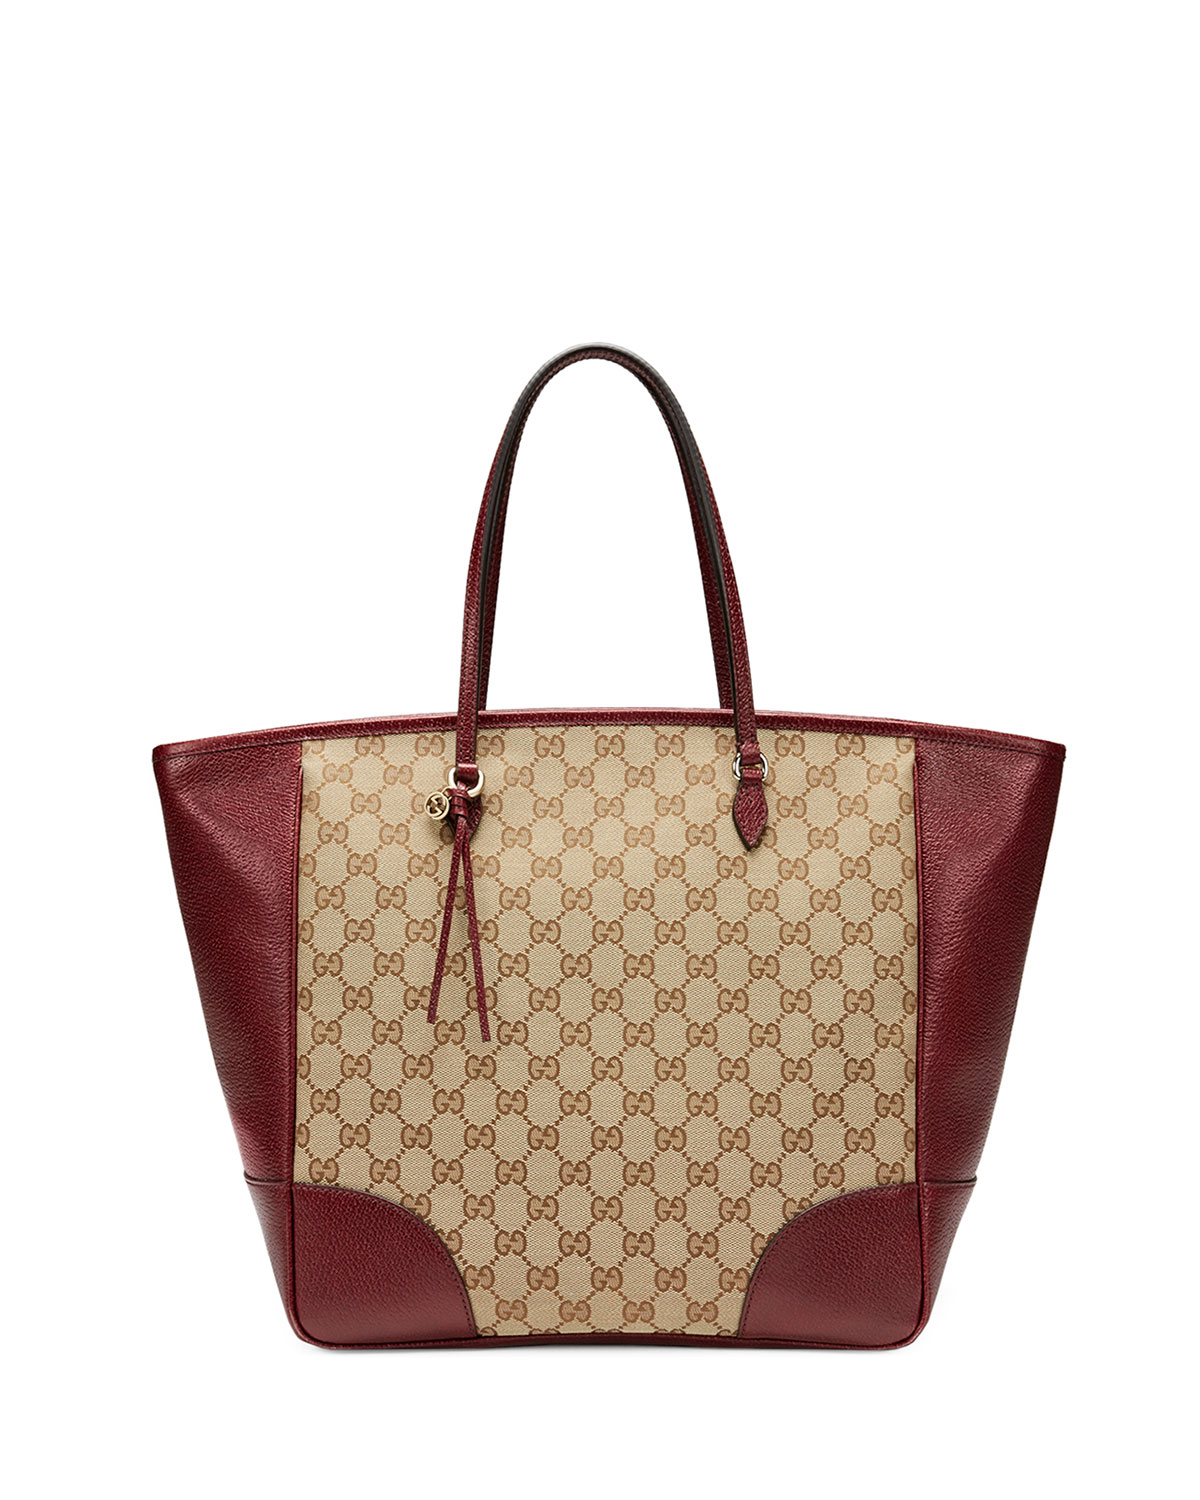 Gucci Bree Medium Gg Canvas Tote Bag in Red (BROWN/RED) | Lyst